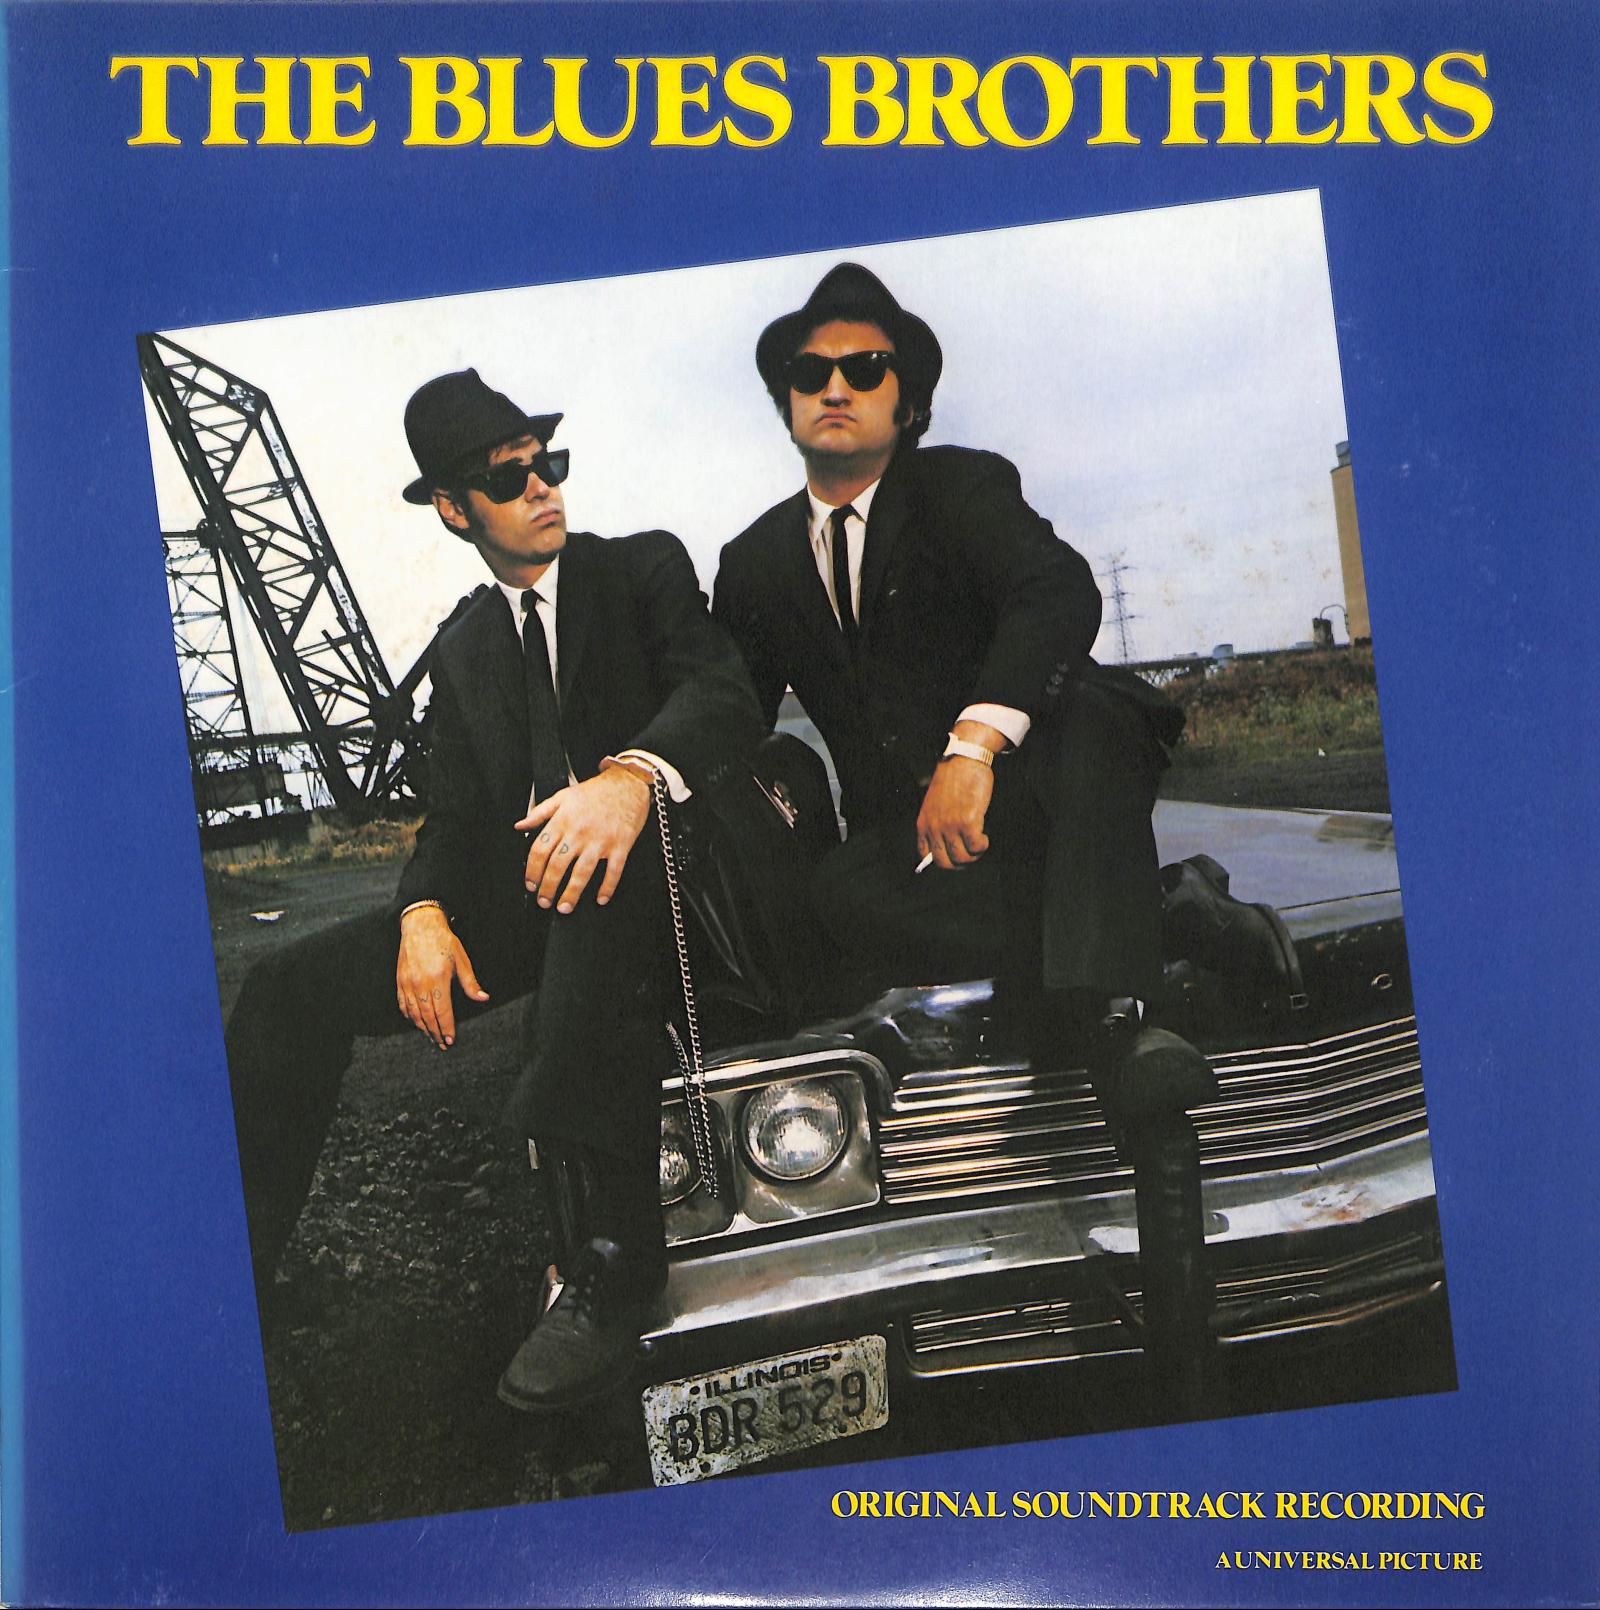 THE BLUES BROTHERS - The Blues Brothers (Original Soundtrack Recording)